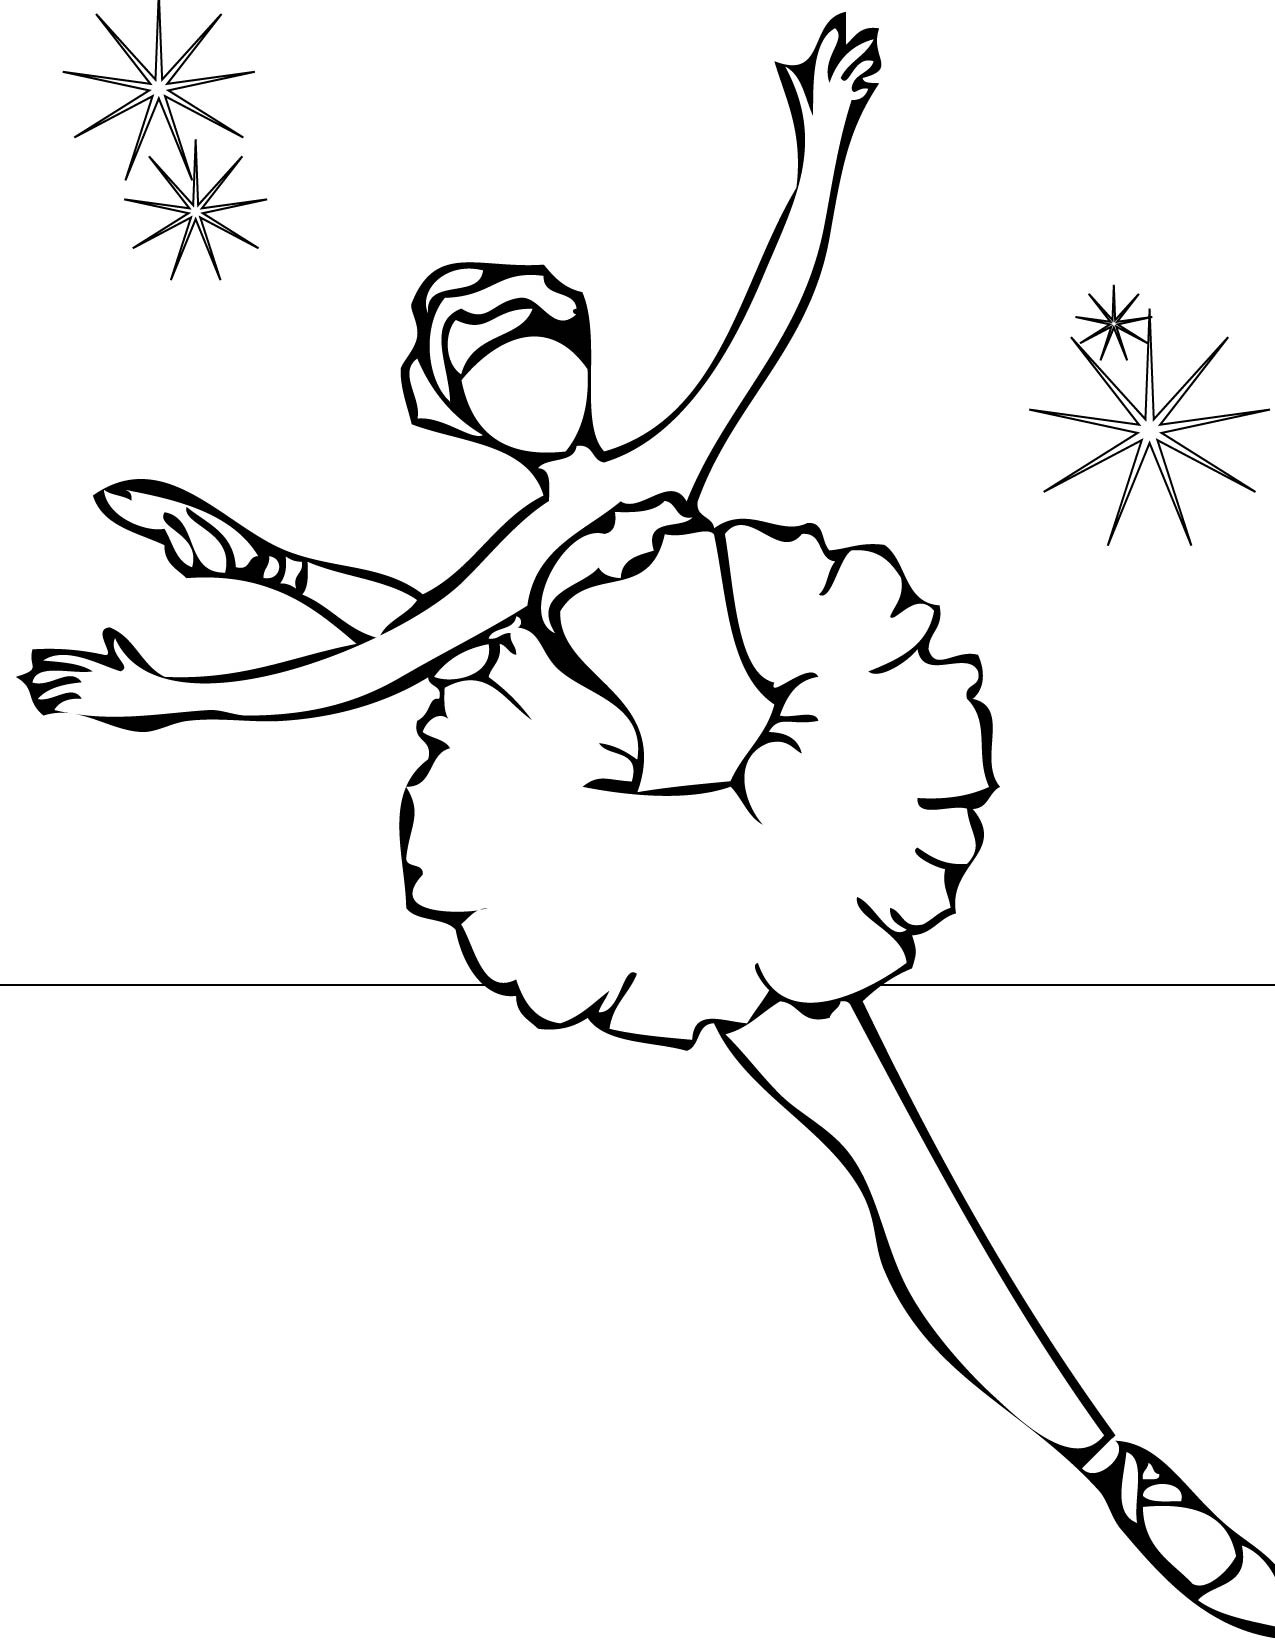 Ballerina Coloring Pages For Girls
 Ballerina Coloring Pages for childrens printable for free